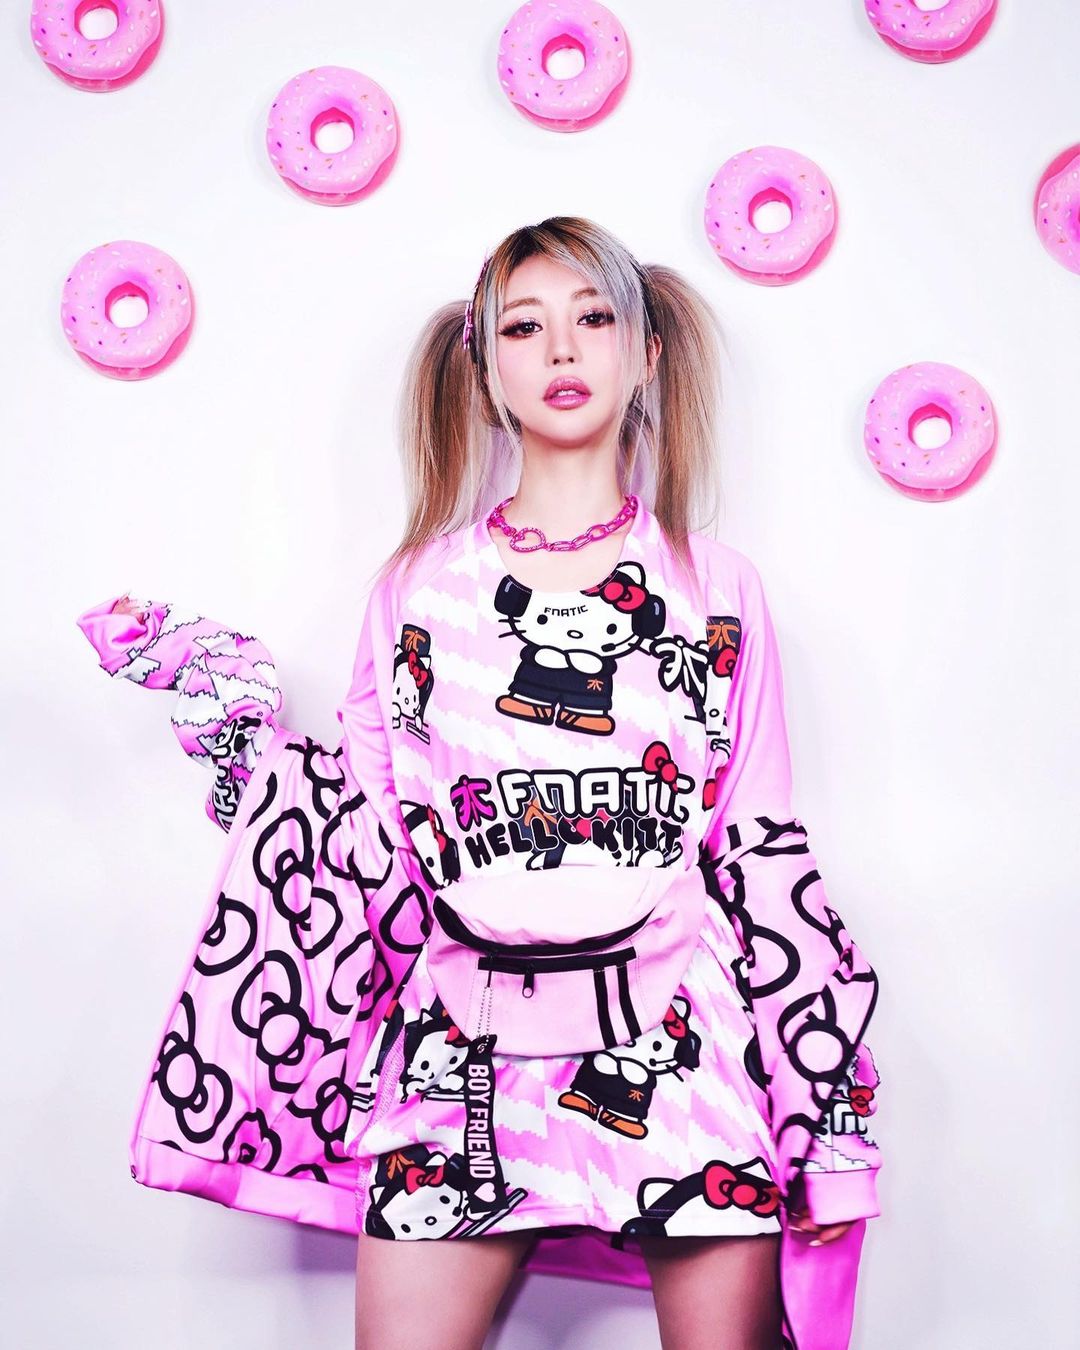 Wengie physical